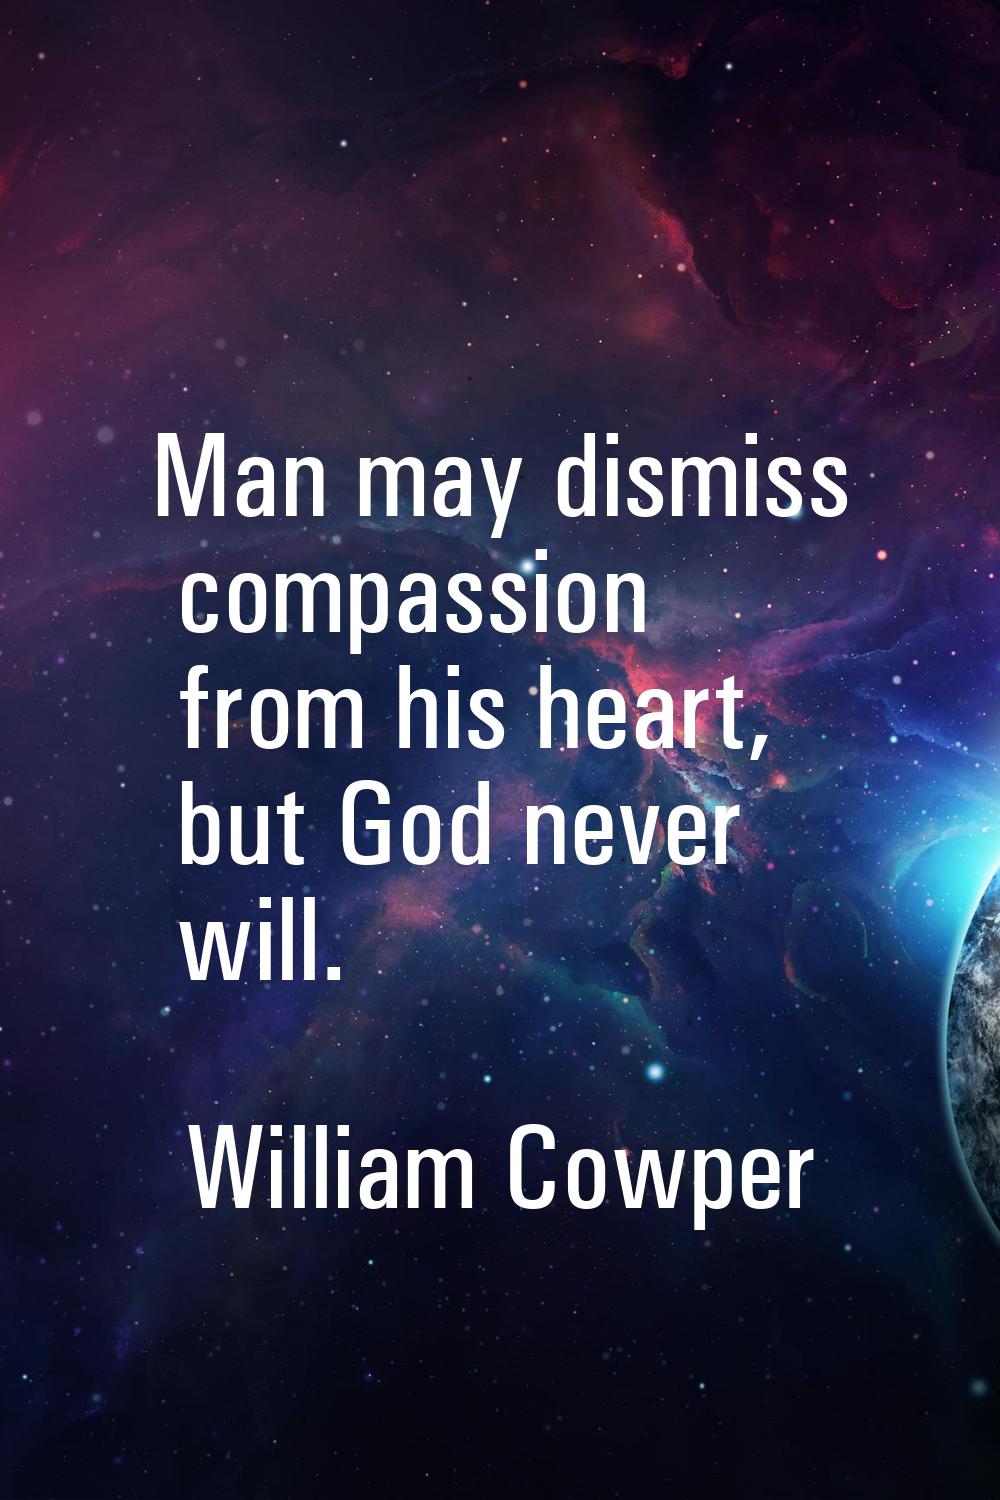 Man may dismiss compassion from his heart, but God never will.